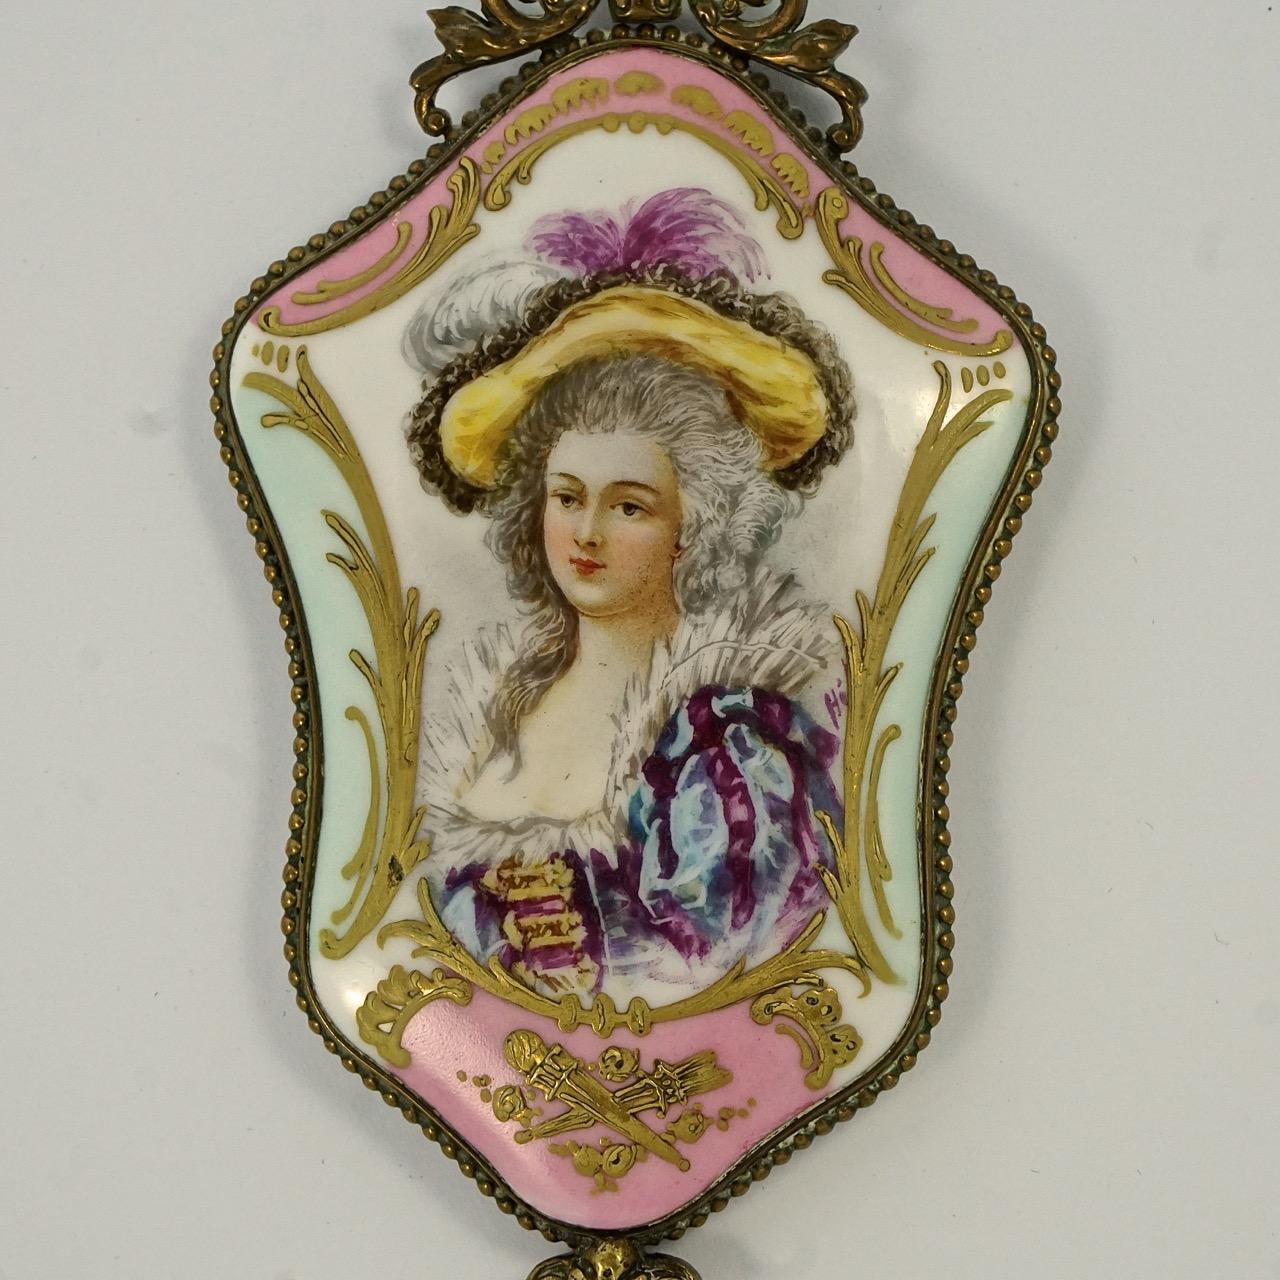 Wonderful antique Victorian French bevelled edge decorative hand mirror with a gilt finish. Featuring a painted porcelain back with a lady design and a pink and blue edging with raised hand painted gold detail. The mirror is edged with a beaded